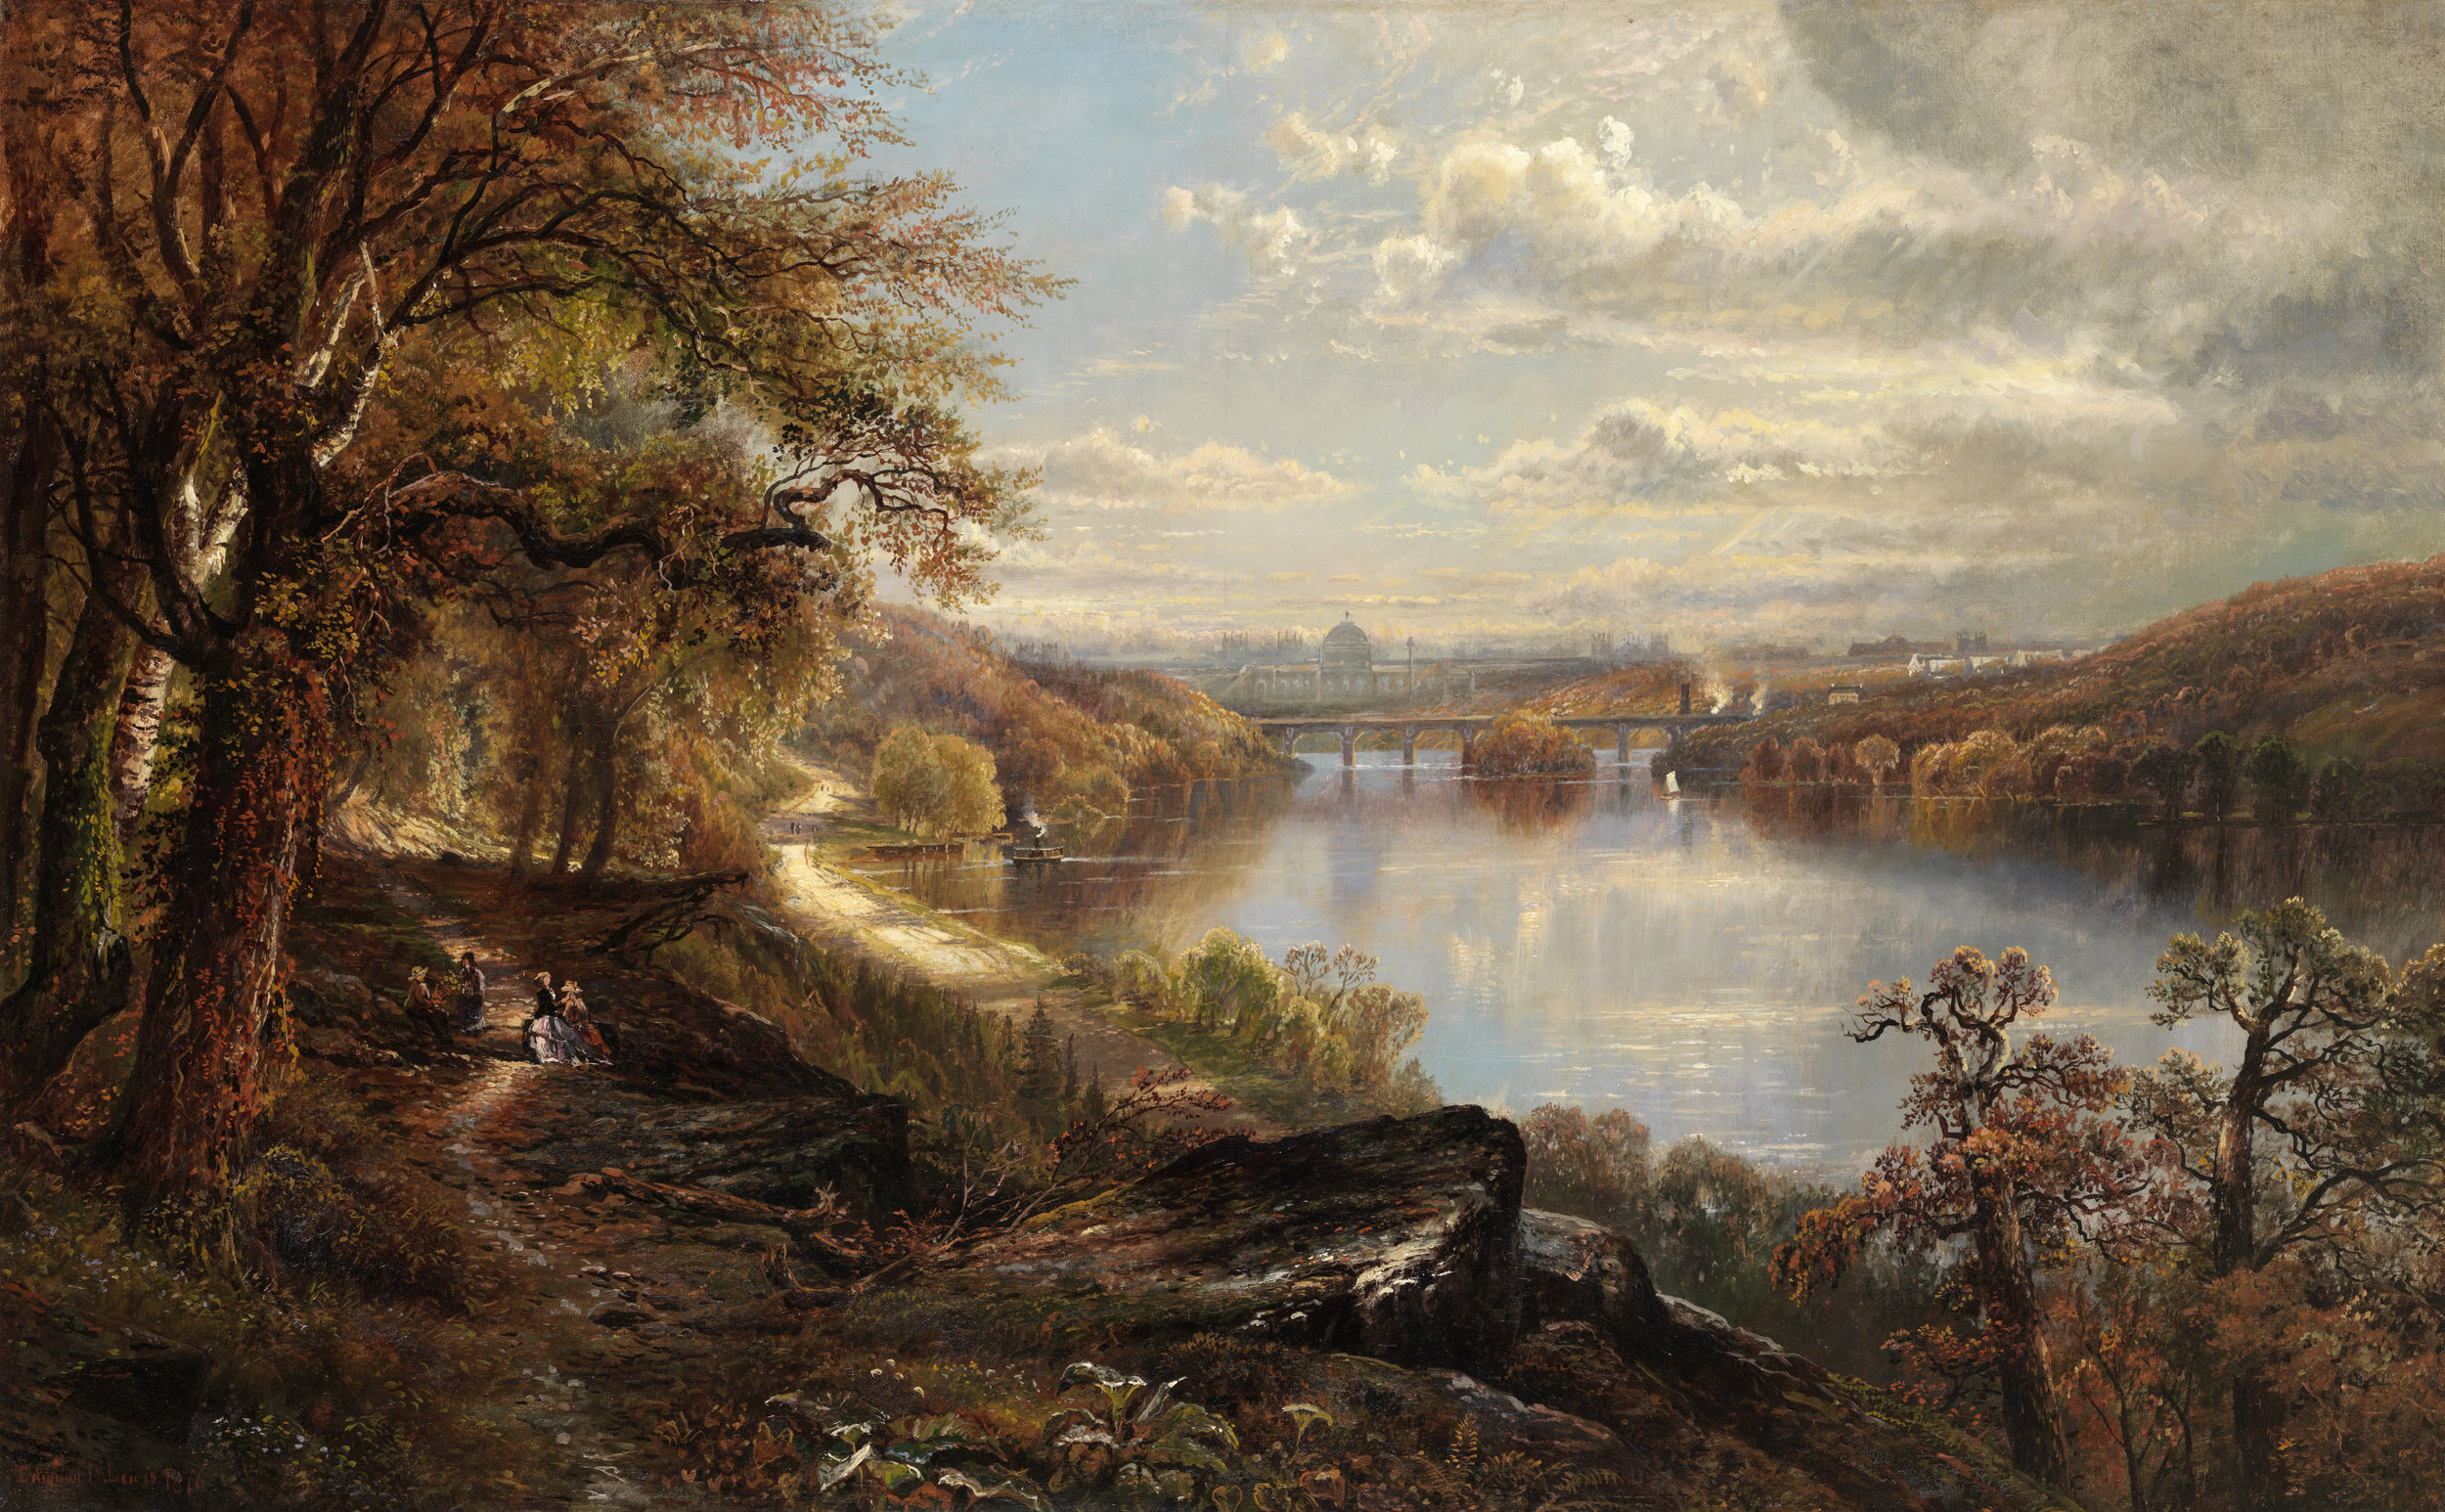  Edmund Darch Lewis (1835-1910)  View of the Schuylkill River with Memorial Hall in the background, 1876  